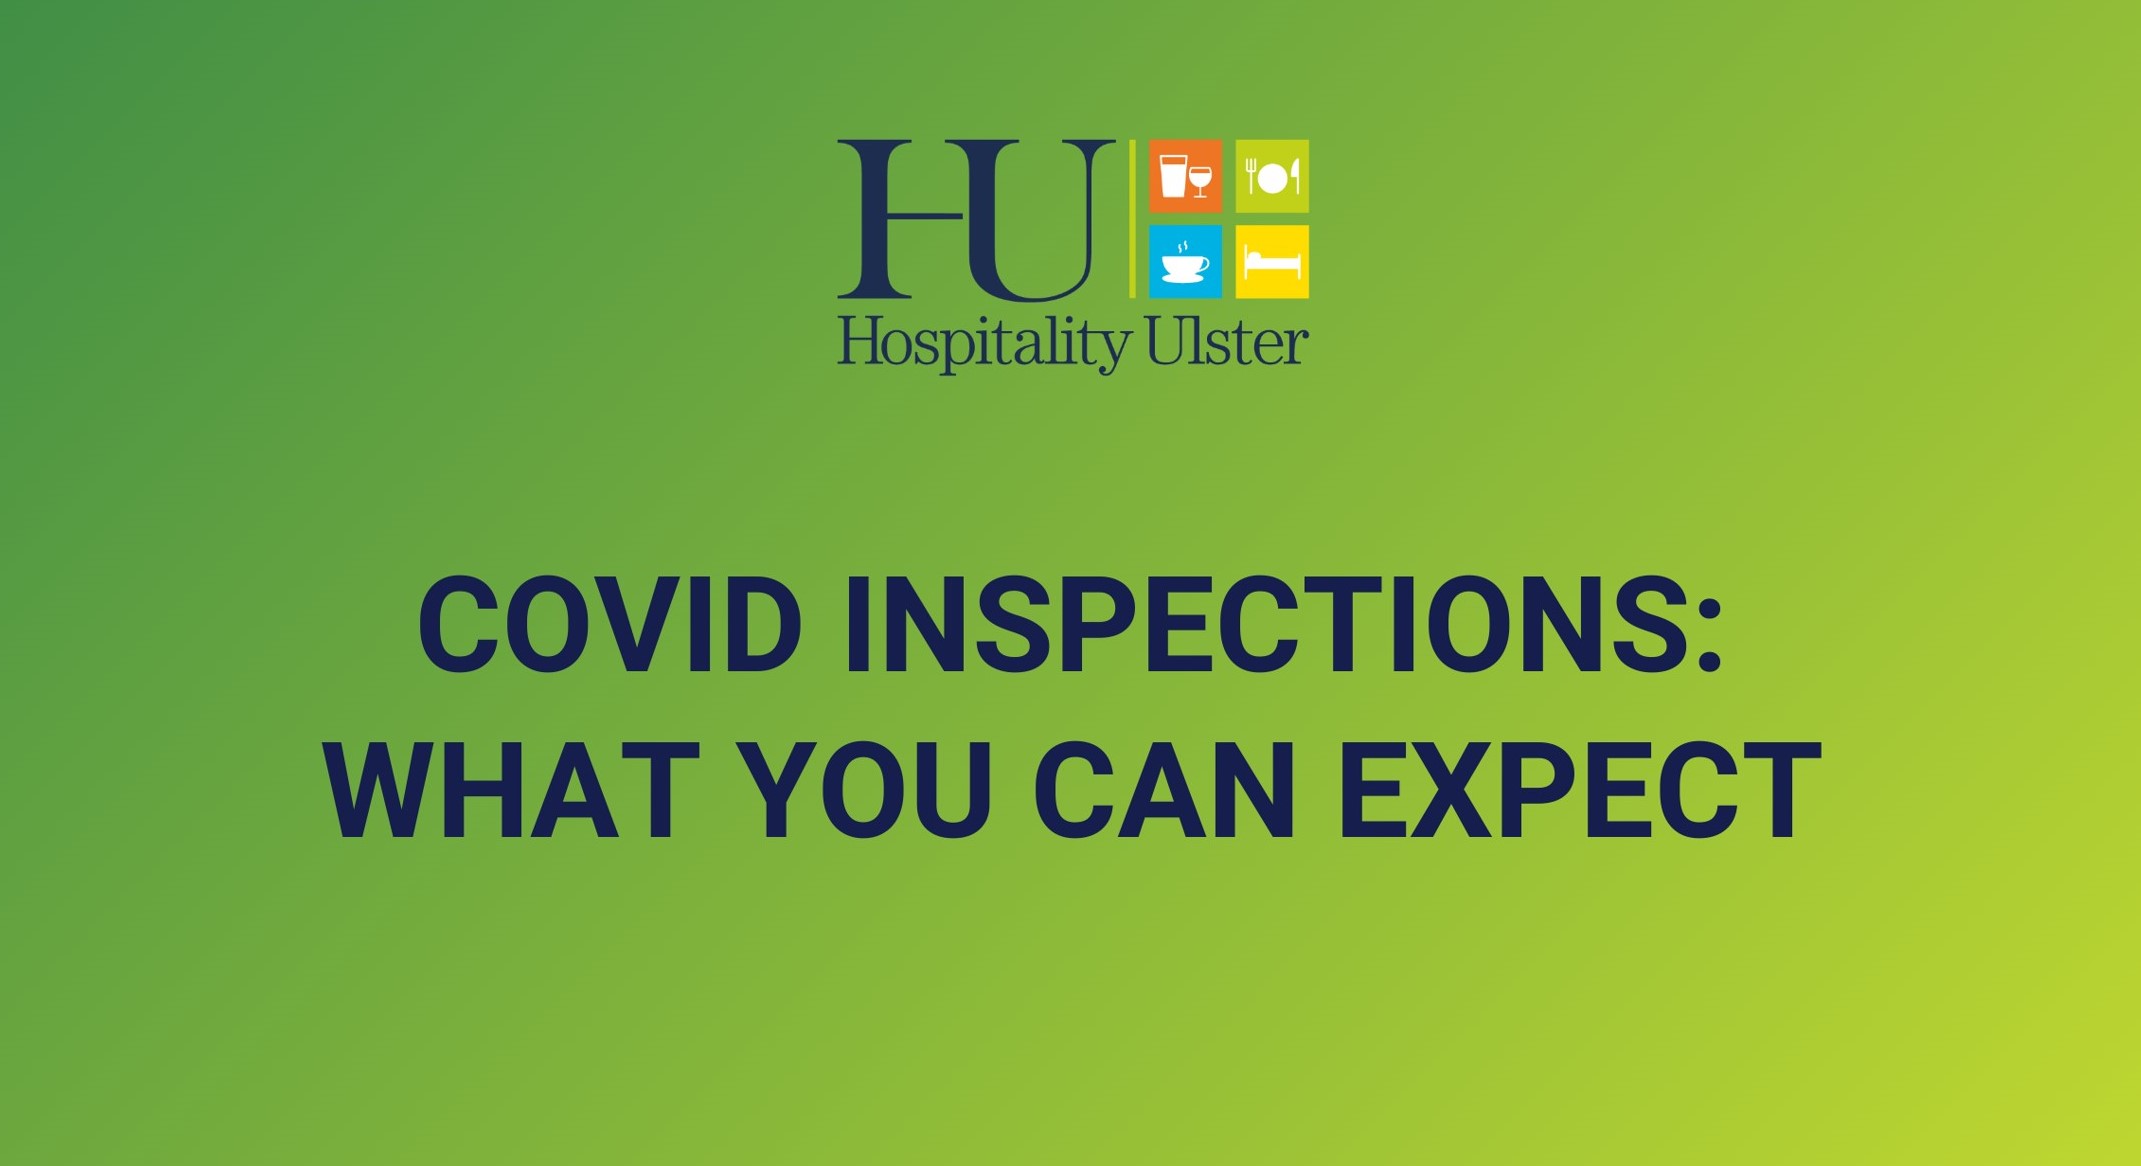 COVID INSPECTIONS - WHAT YOU CAN EXPECT